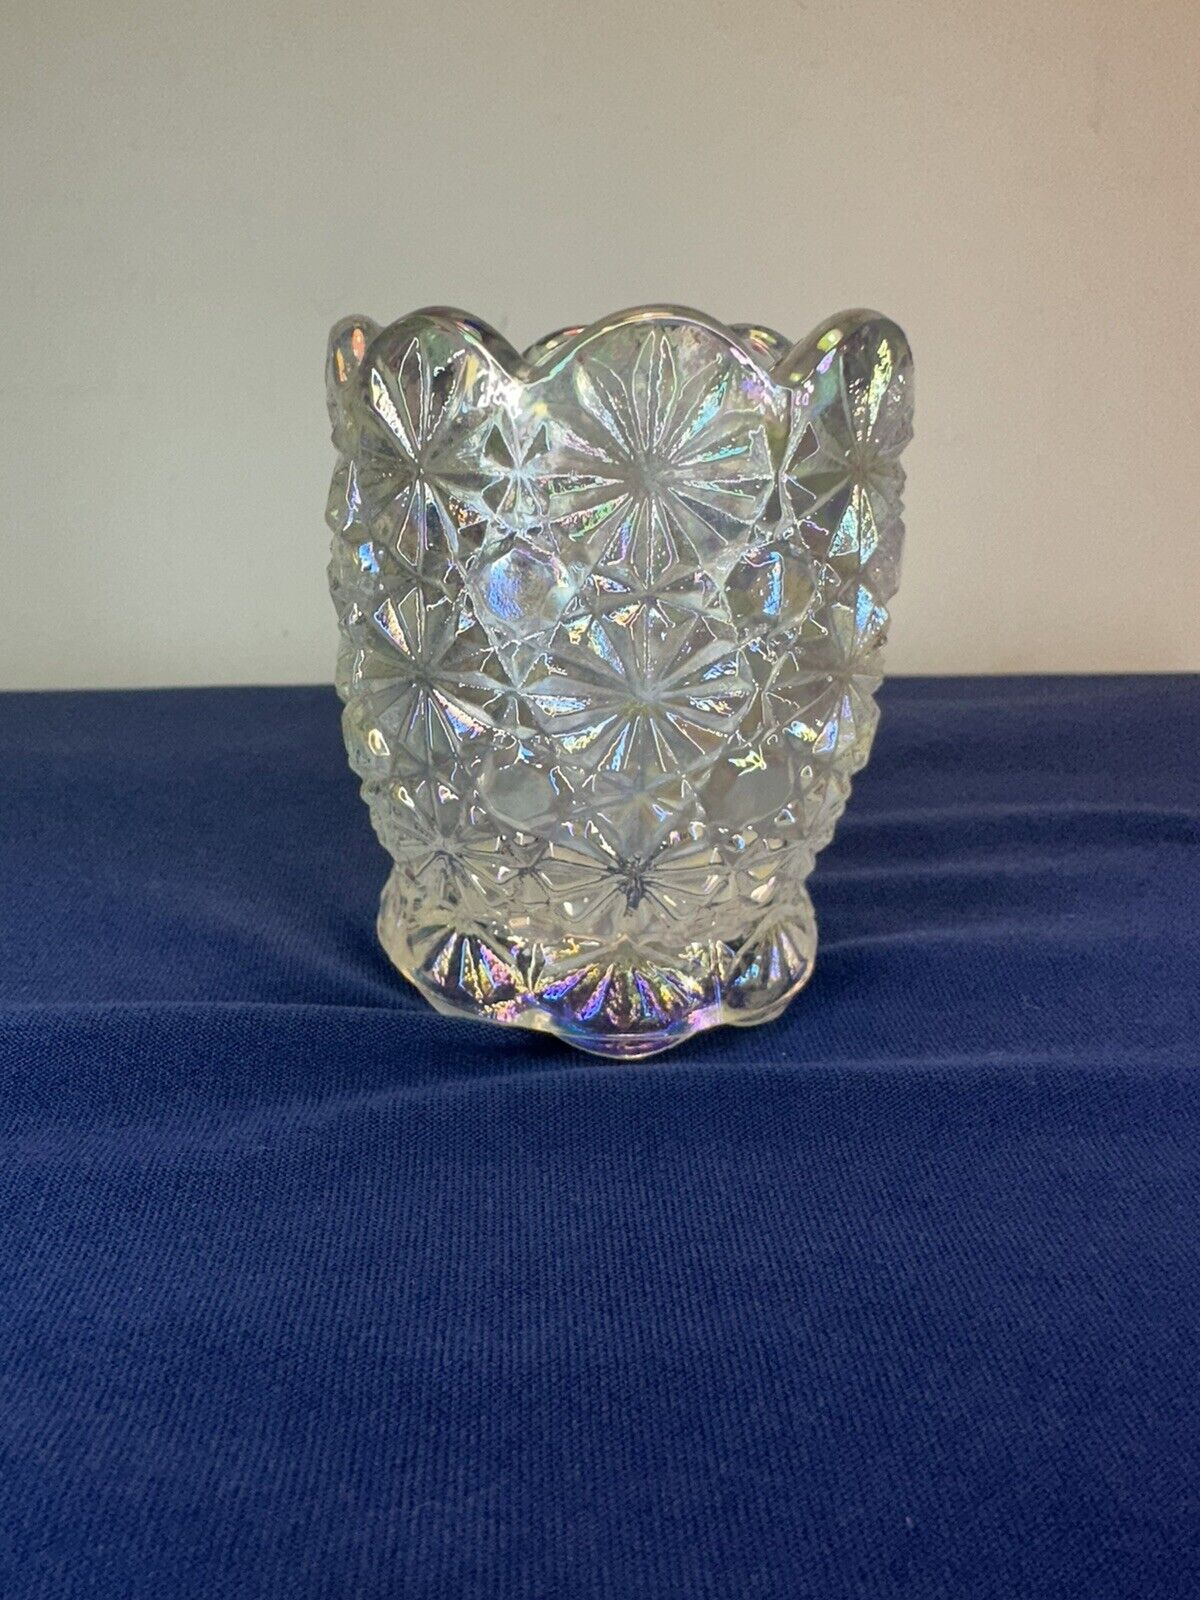 CLEAR IRIDESCENT GLASS VOTIVE CANDLE HOLDER -LE SMITH DAISY & BUTTON -